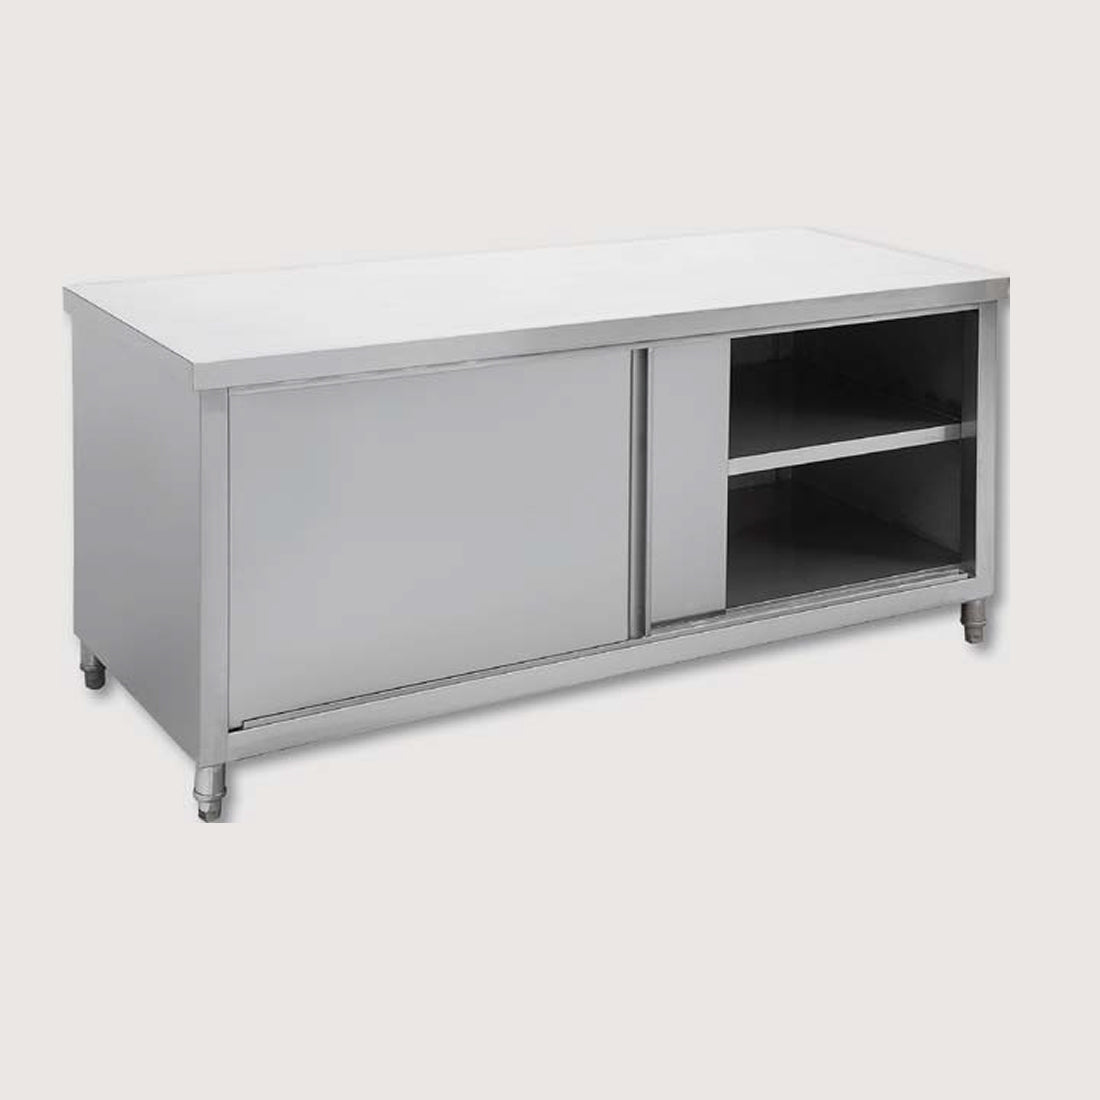 Quality Grade 304 S/S Pass though cabinet (double sided) – STHT-1800-H - Cafe Supply